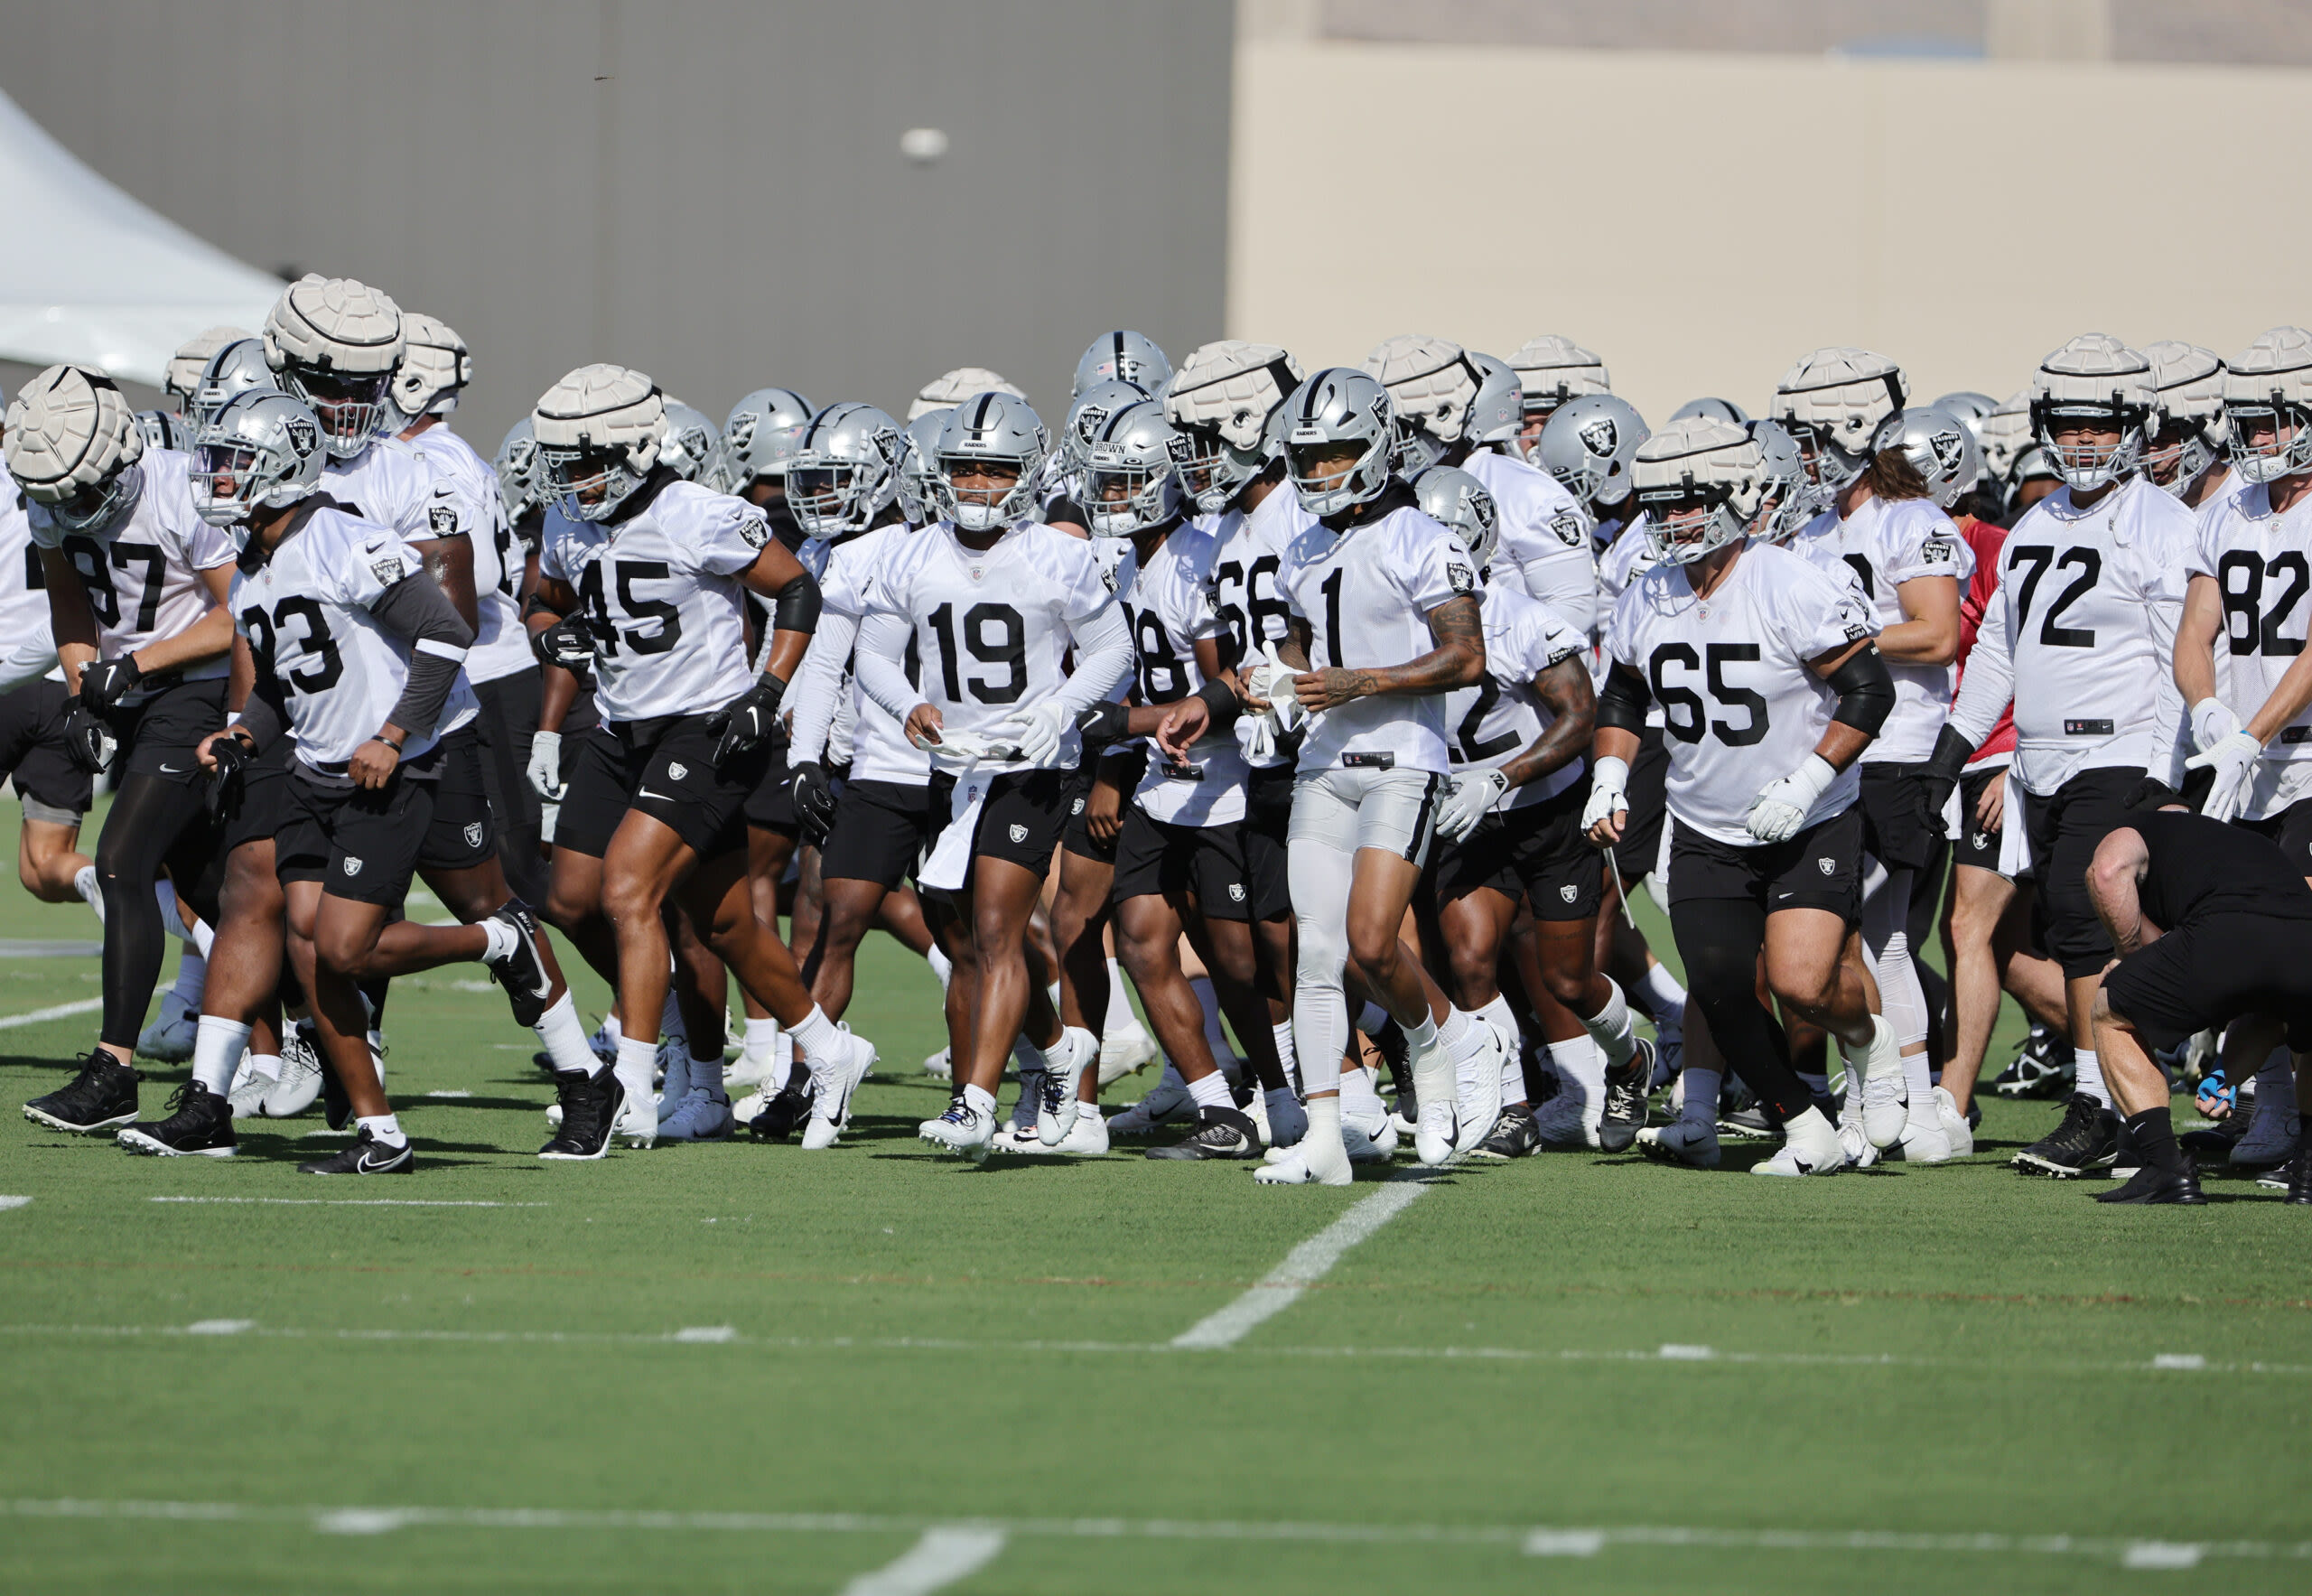 Costa Mesa City Council unanimously approves hosting of Raiders 2024 Training Camp